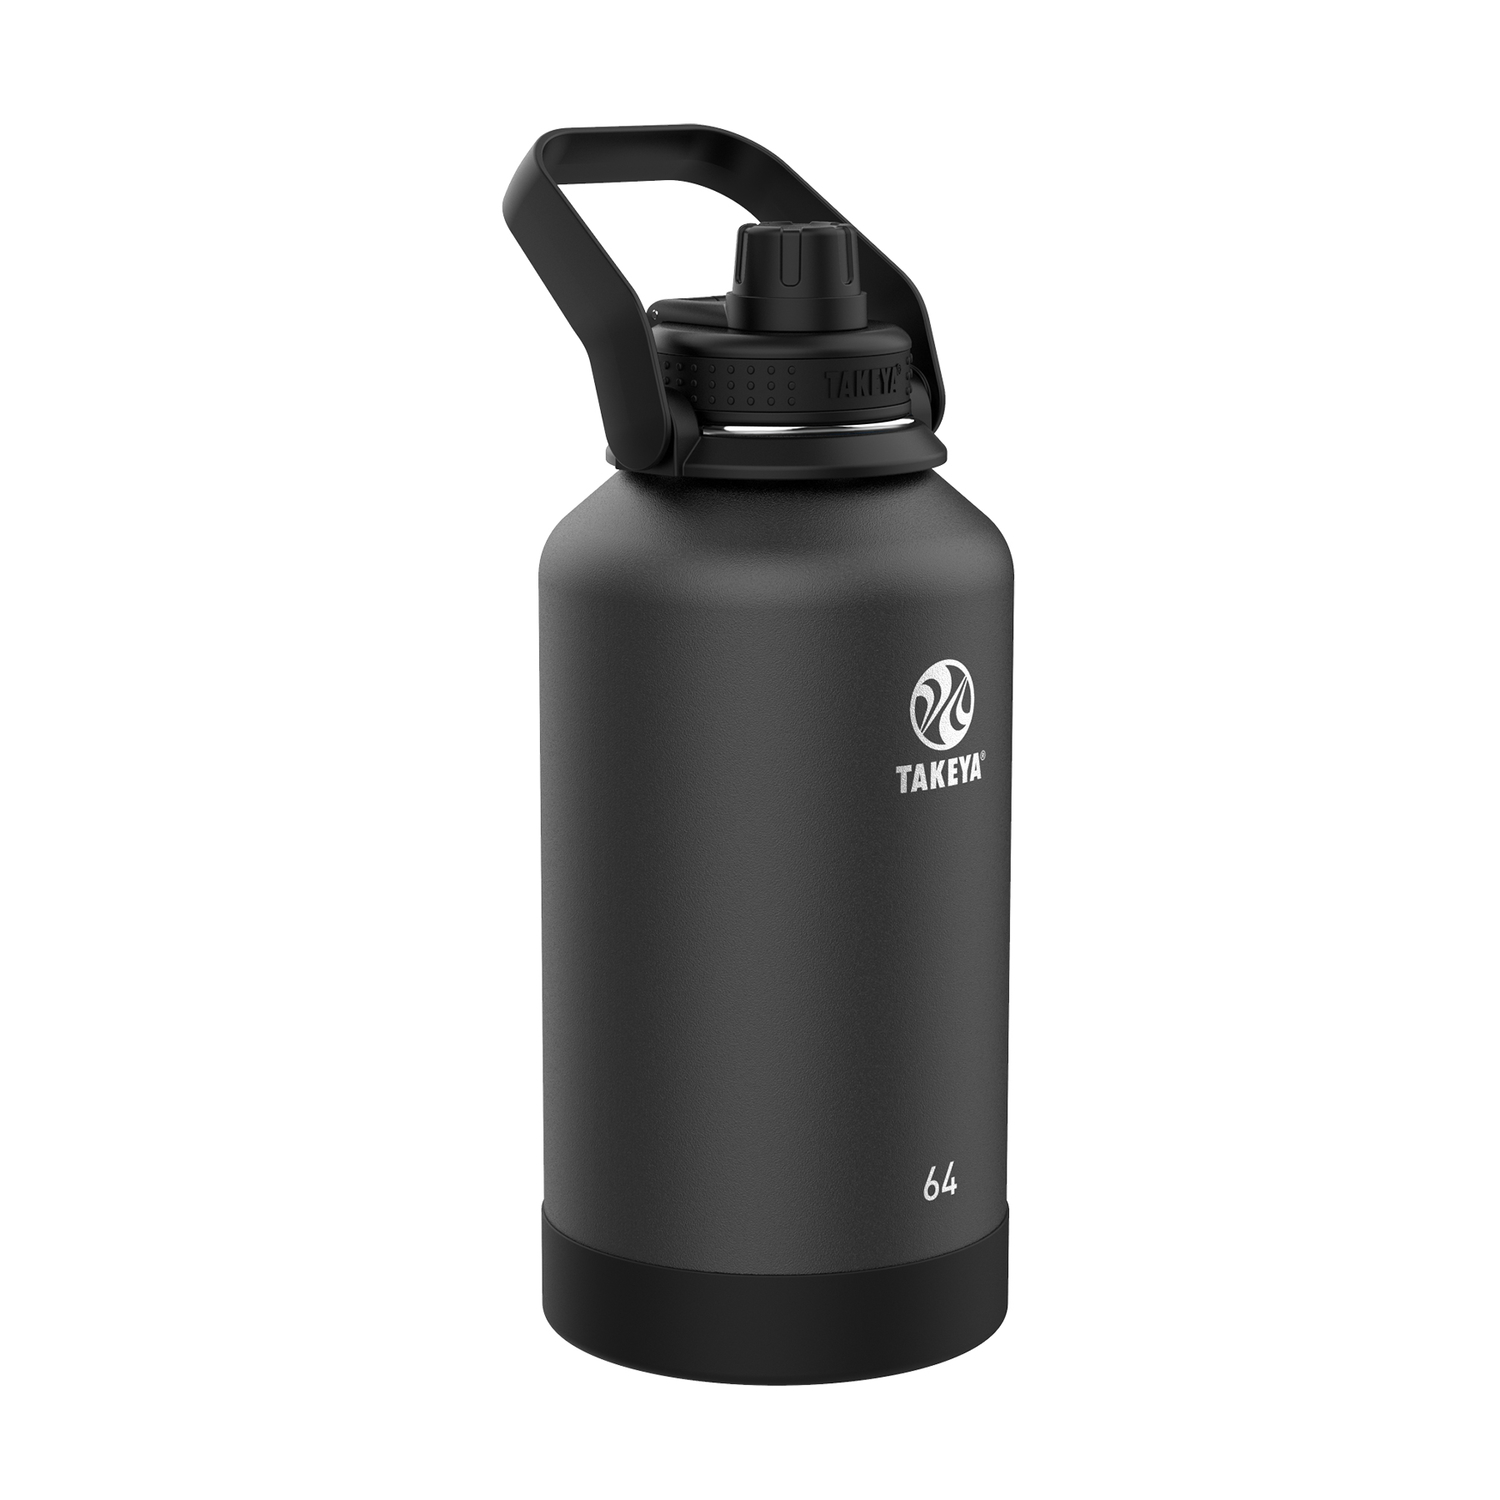 Photos - Other Accessories OZ Racing Takeya Actives 64 oz Onyx BPA Free Double Wall Insulated Water Bottle 5111 